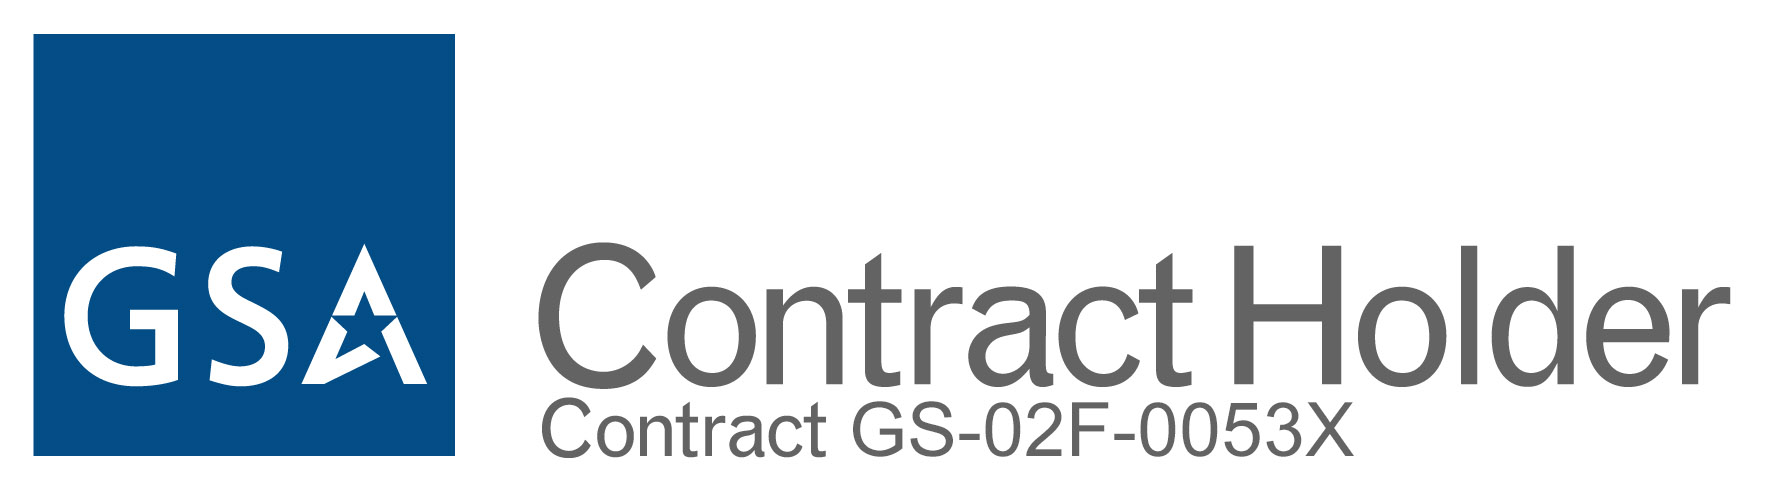 gsa contract holder.  contract GS-02F-0053X